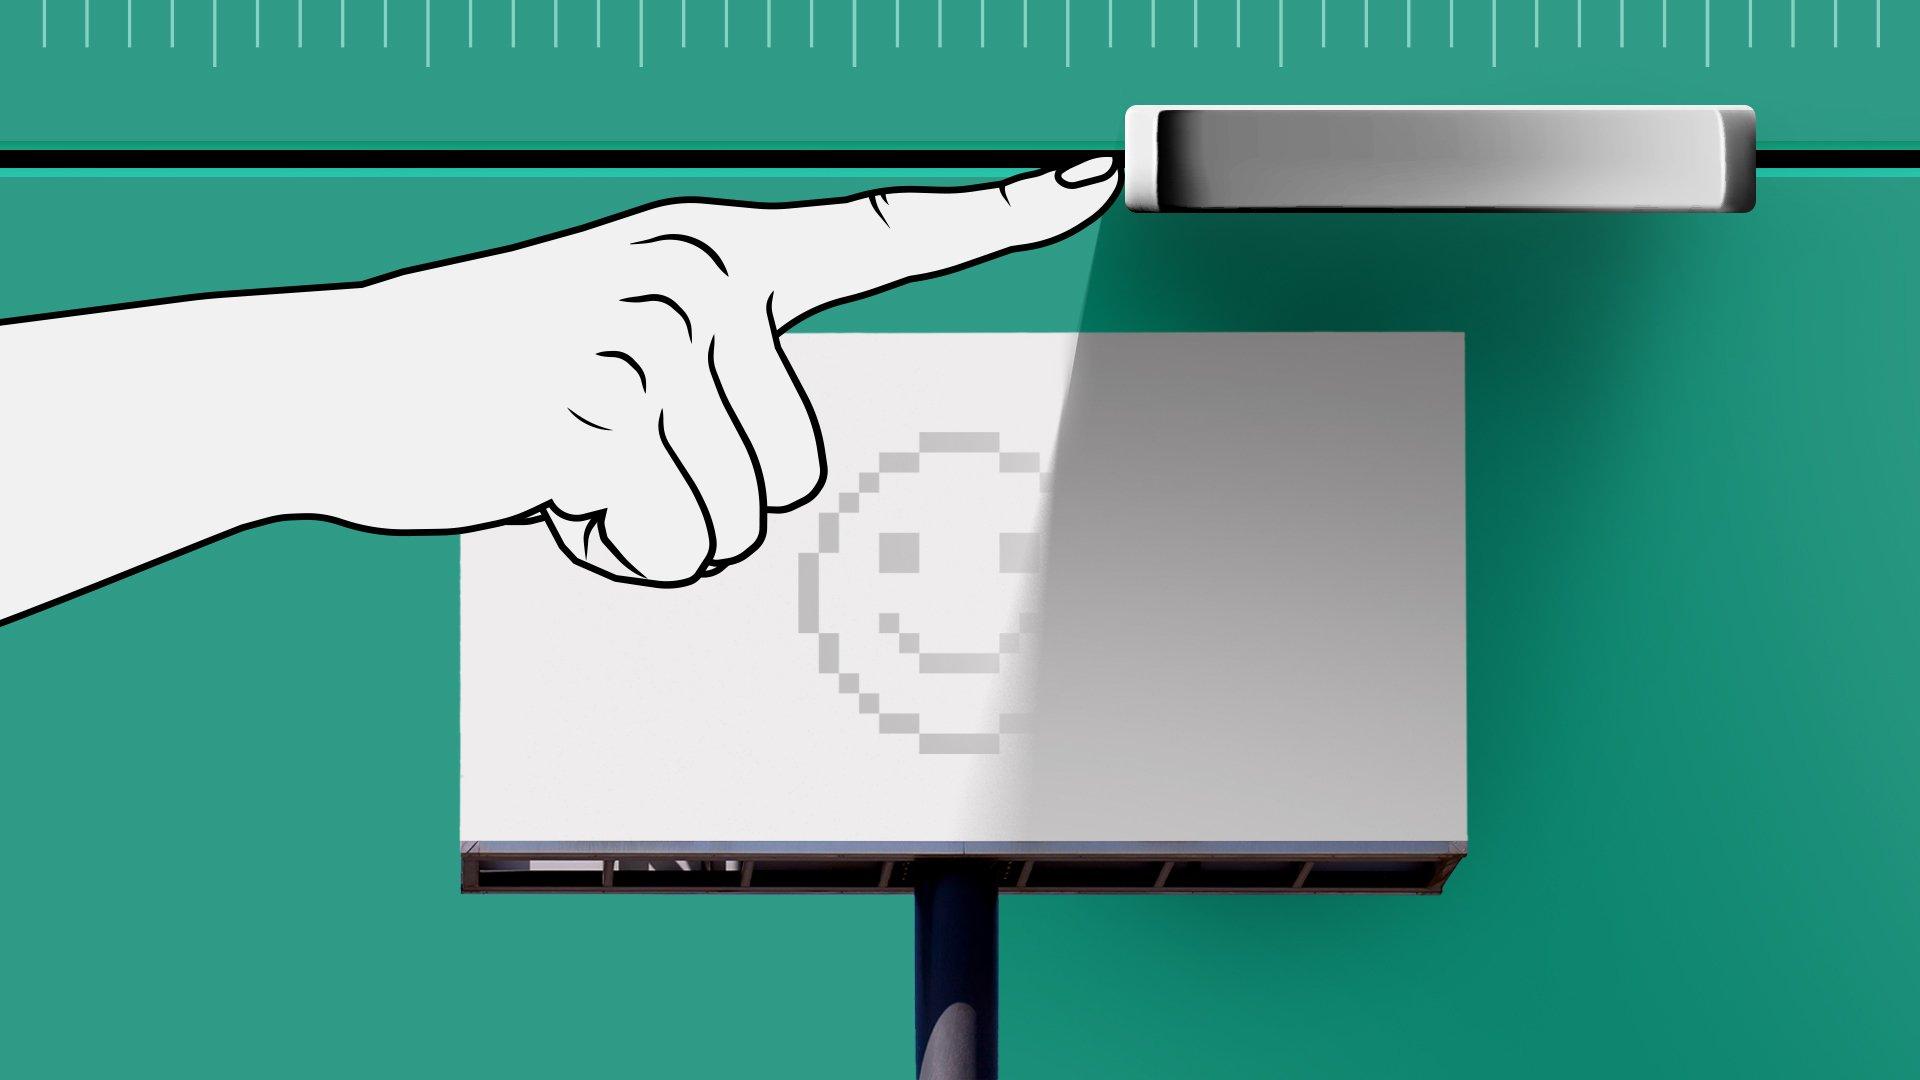 Green background with a graphic of a hand pushing a slider above a billboard with a smiley graphic